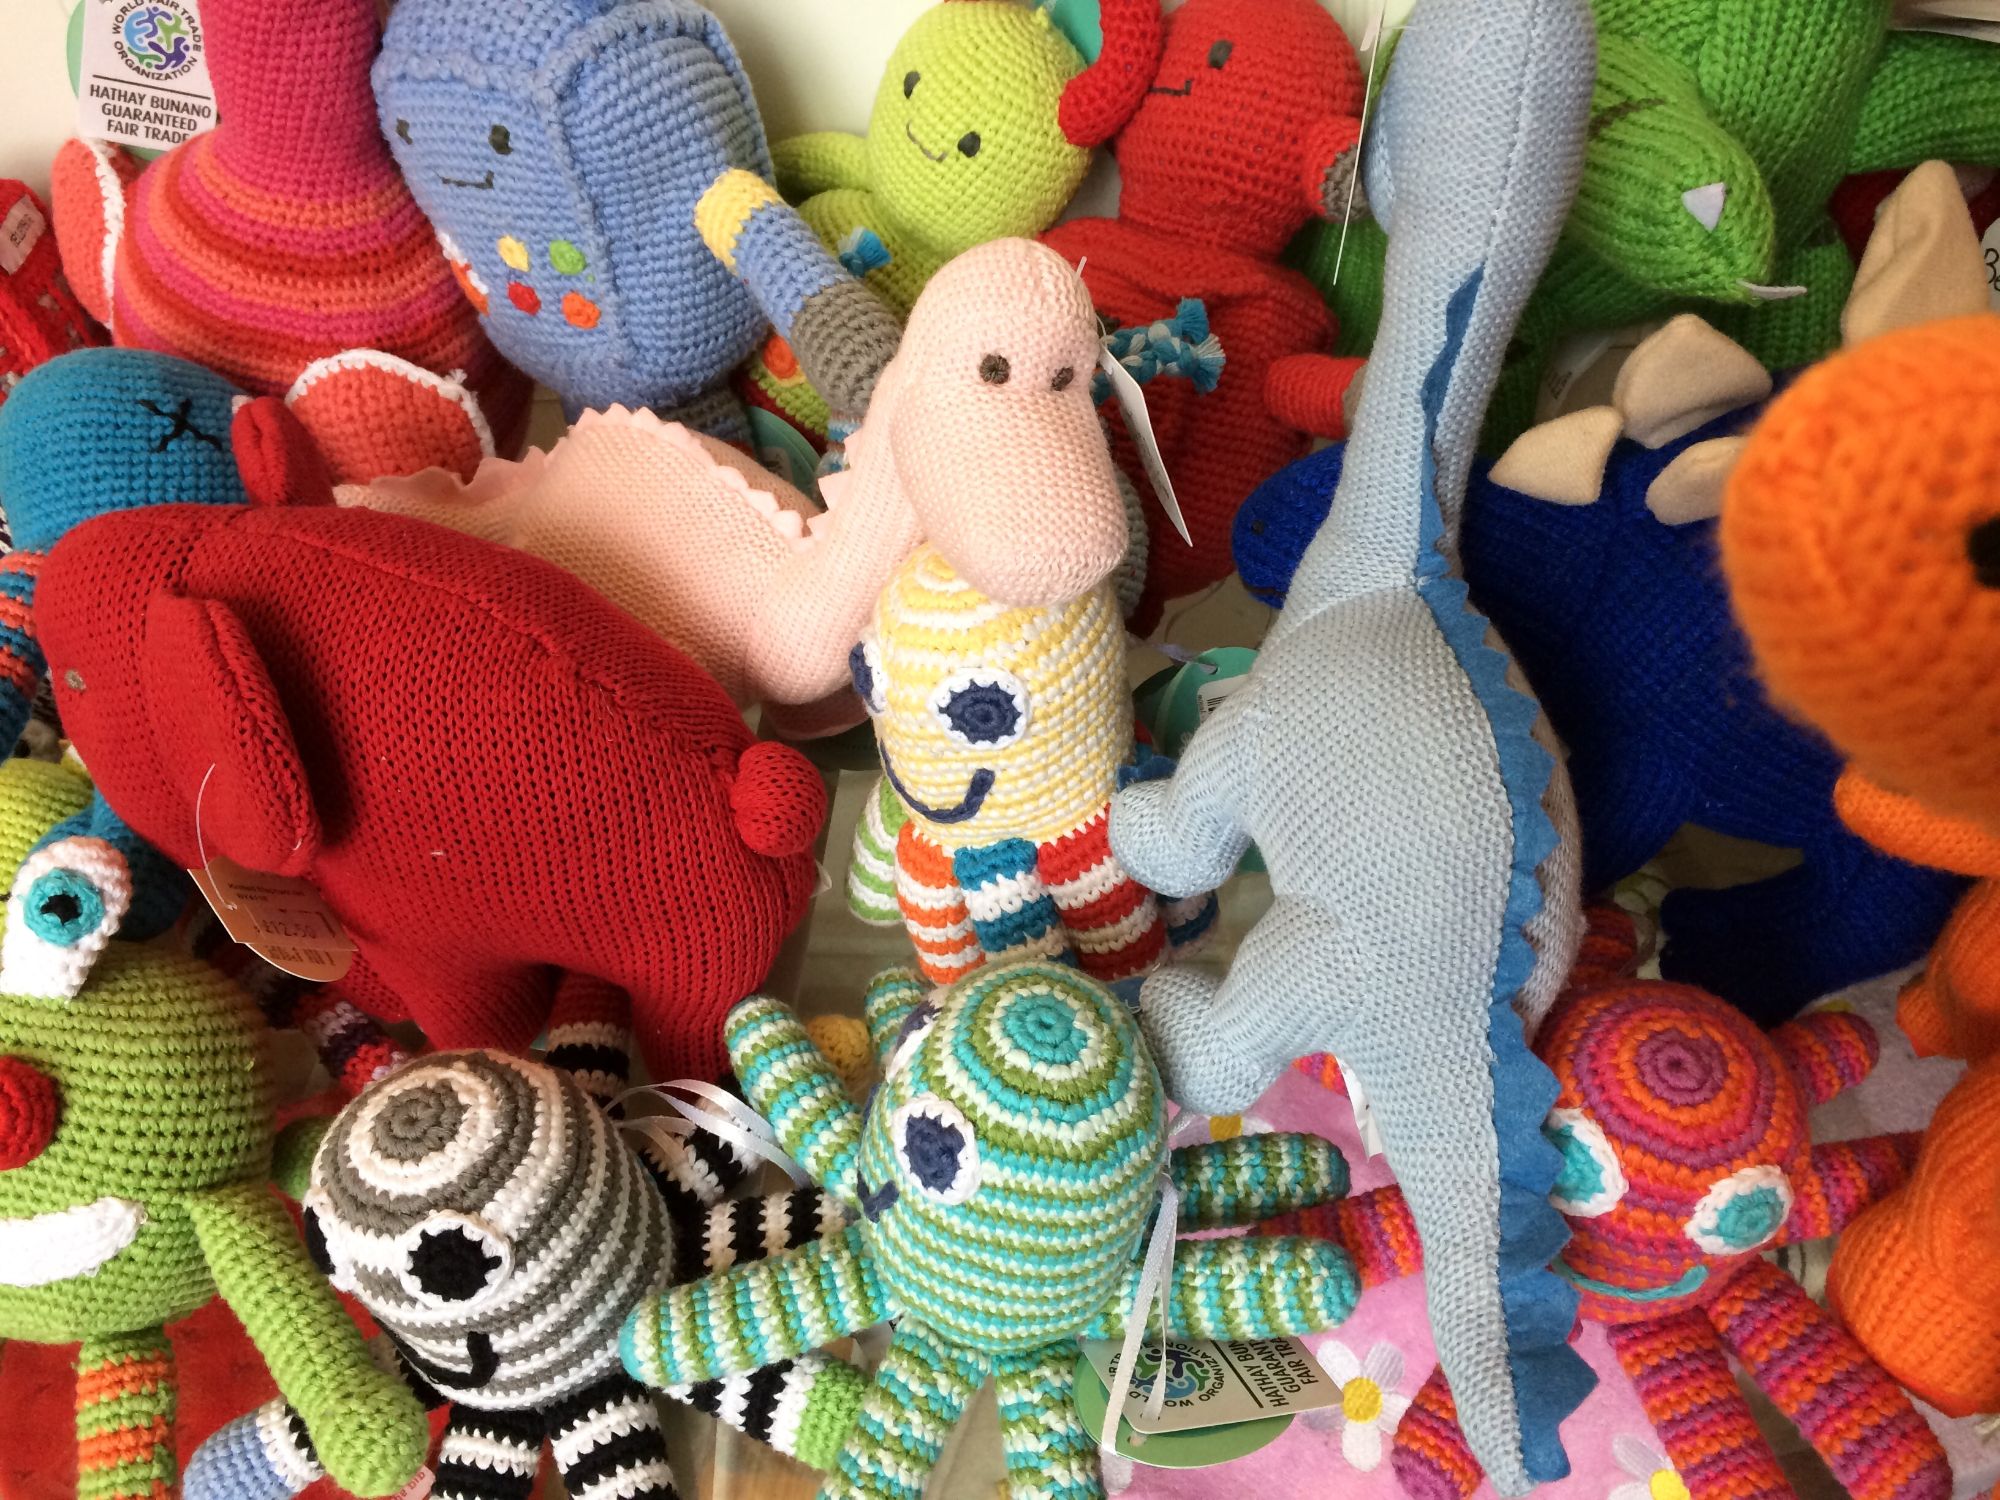 Best Years toys include the fair trade Pebble brand